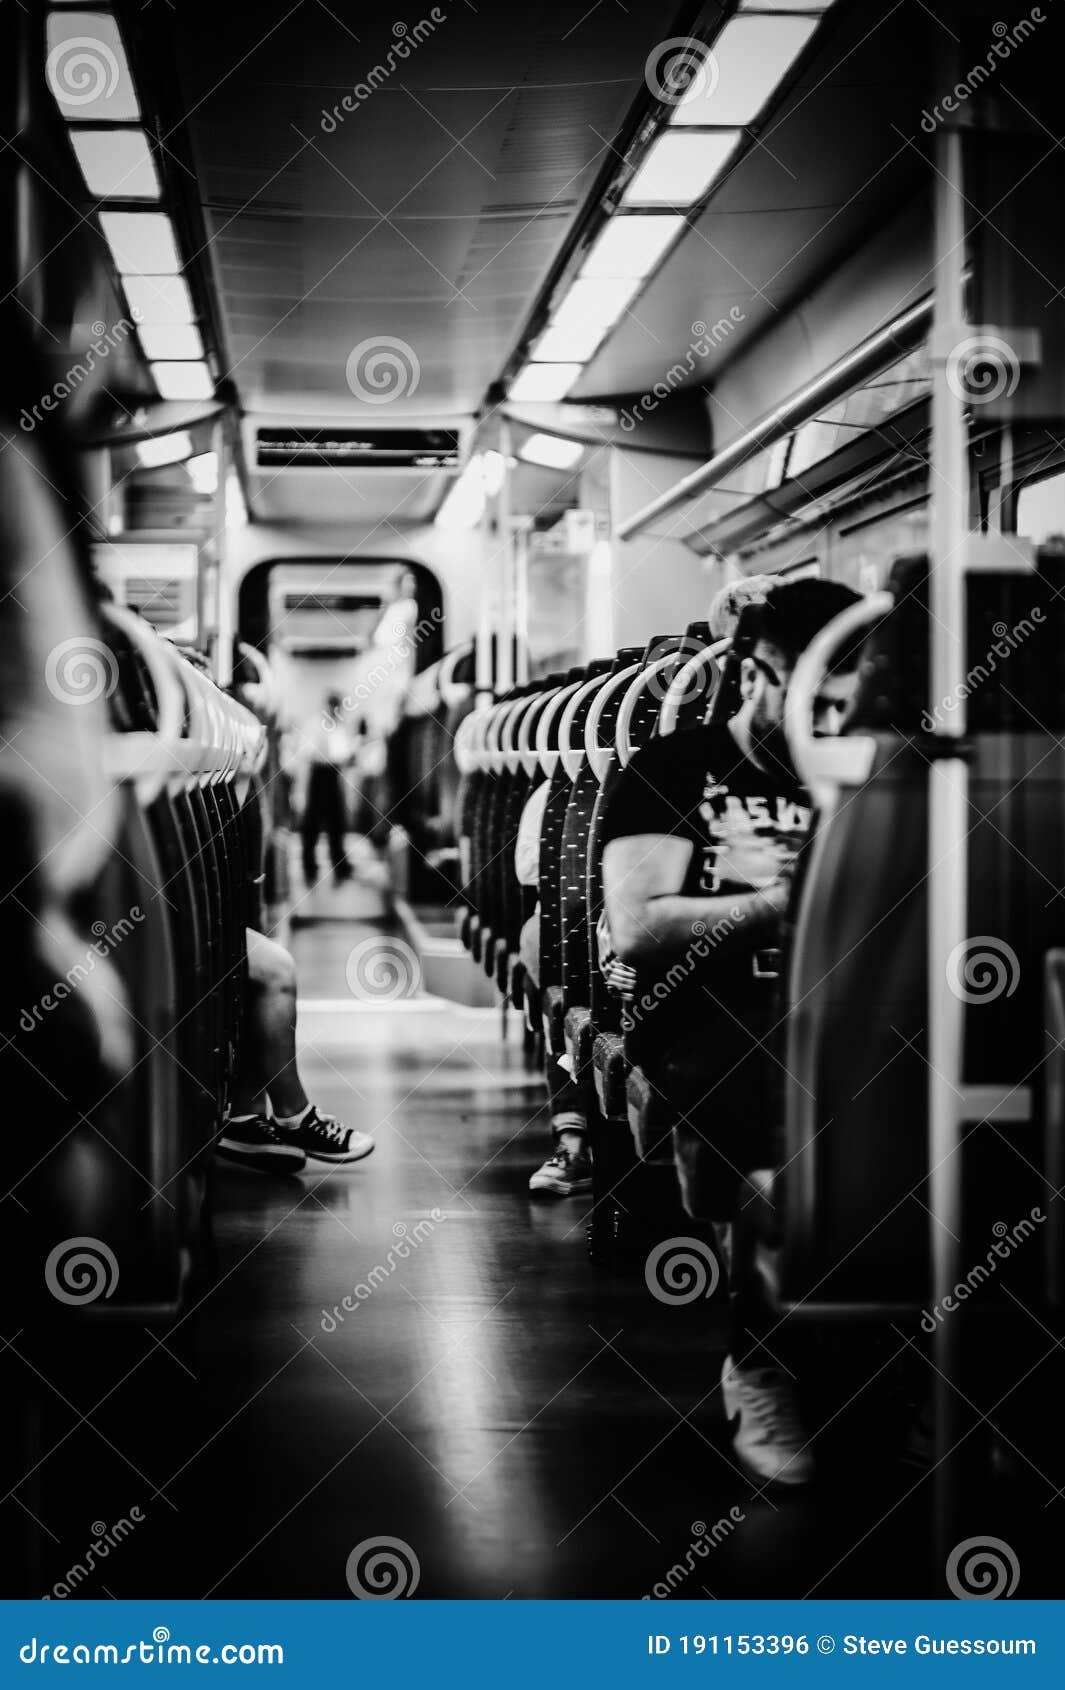 long angle vieuw od a train interior in black and white